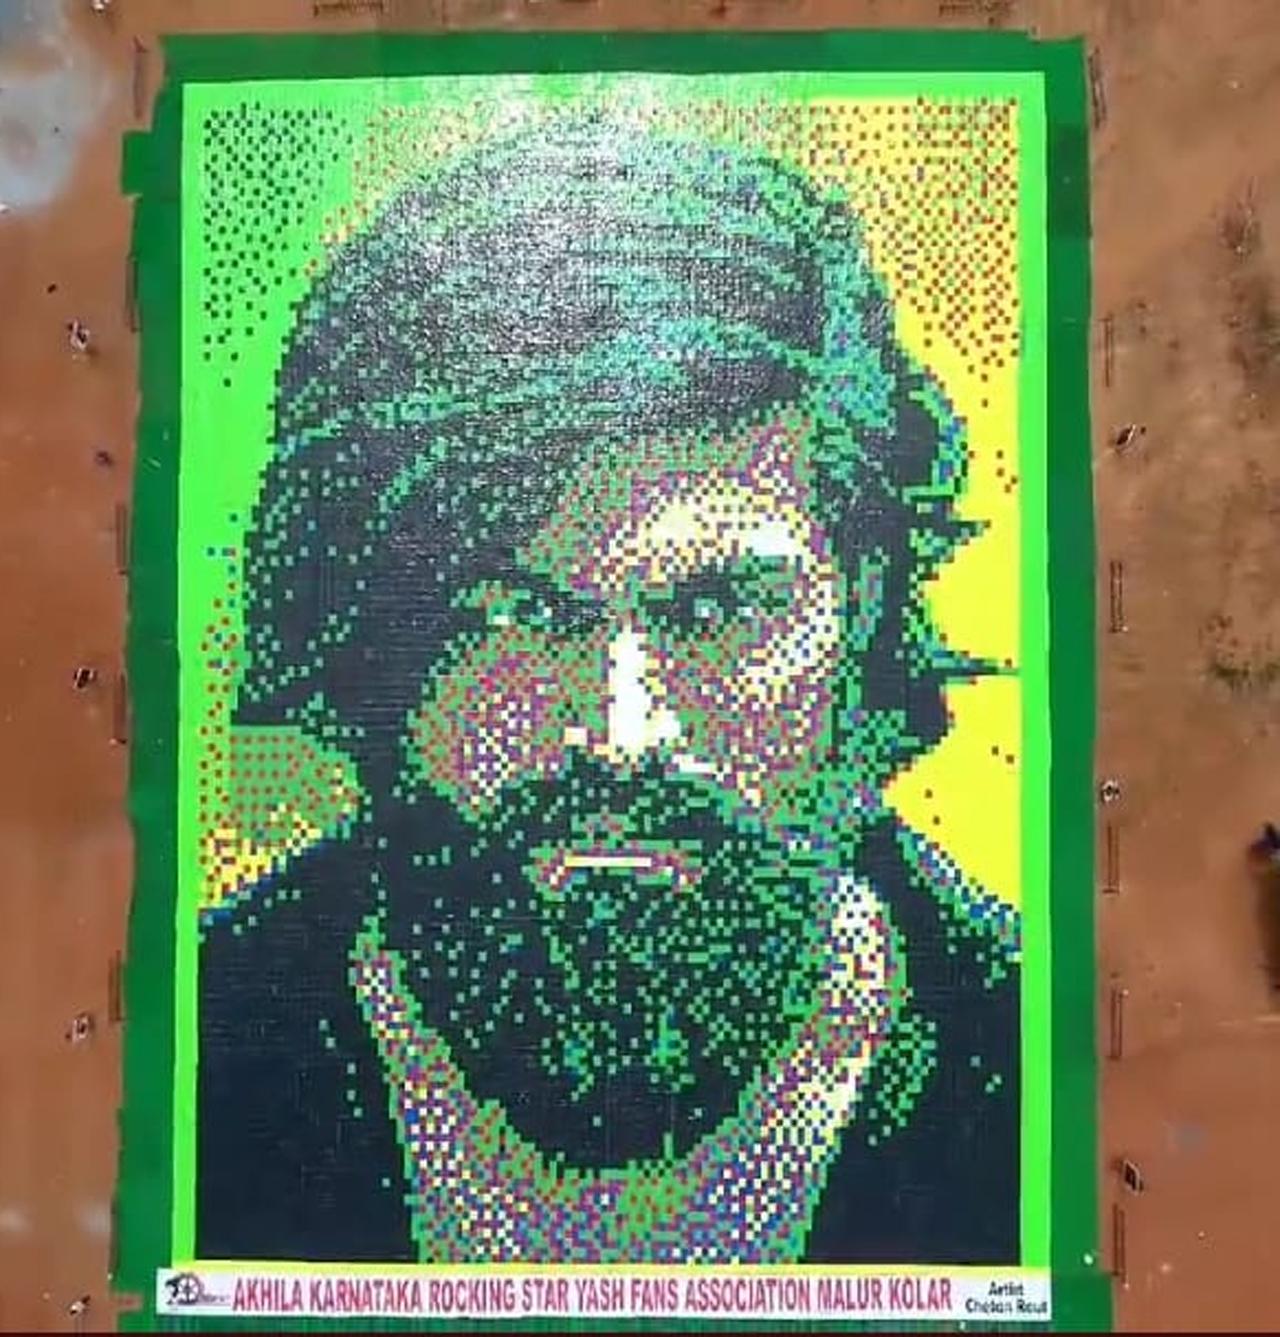 Ahead of 'KGF: Chapter 2' release, the film's star Yash's fans have set out to create a record of sorts to show their love and admiration. Using as many as 20,700 books, they have created a massive mosaic portrait of Yash, staking claim to a world record. The portrait, made up entirely of books, measures 130 x 190 feet, and is spread over 25,650 square feet at the White Garden Grounds of Malur. The Yash Fans Association of Malur have taken up the project.